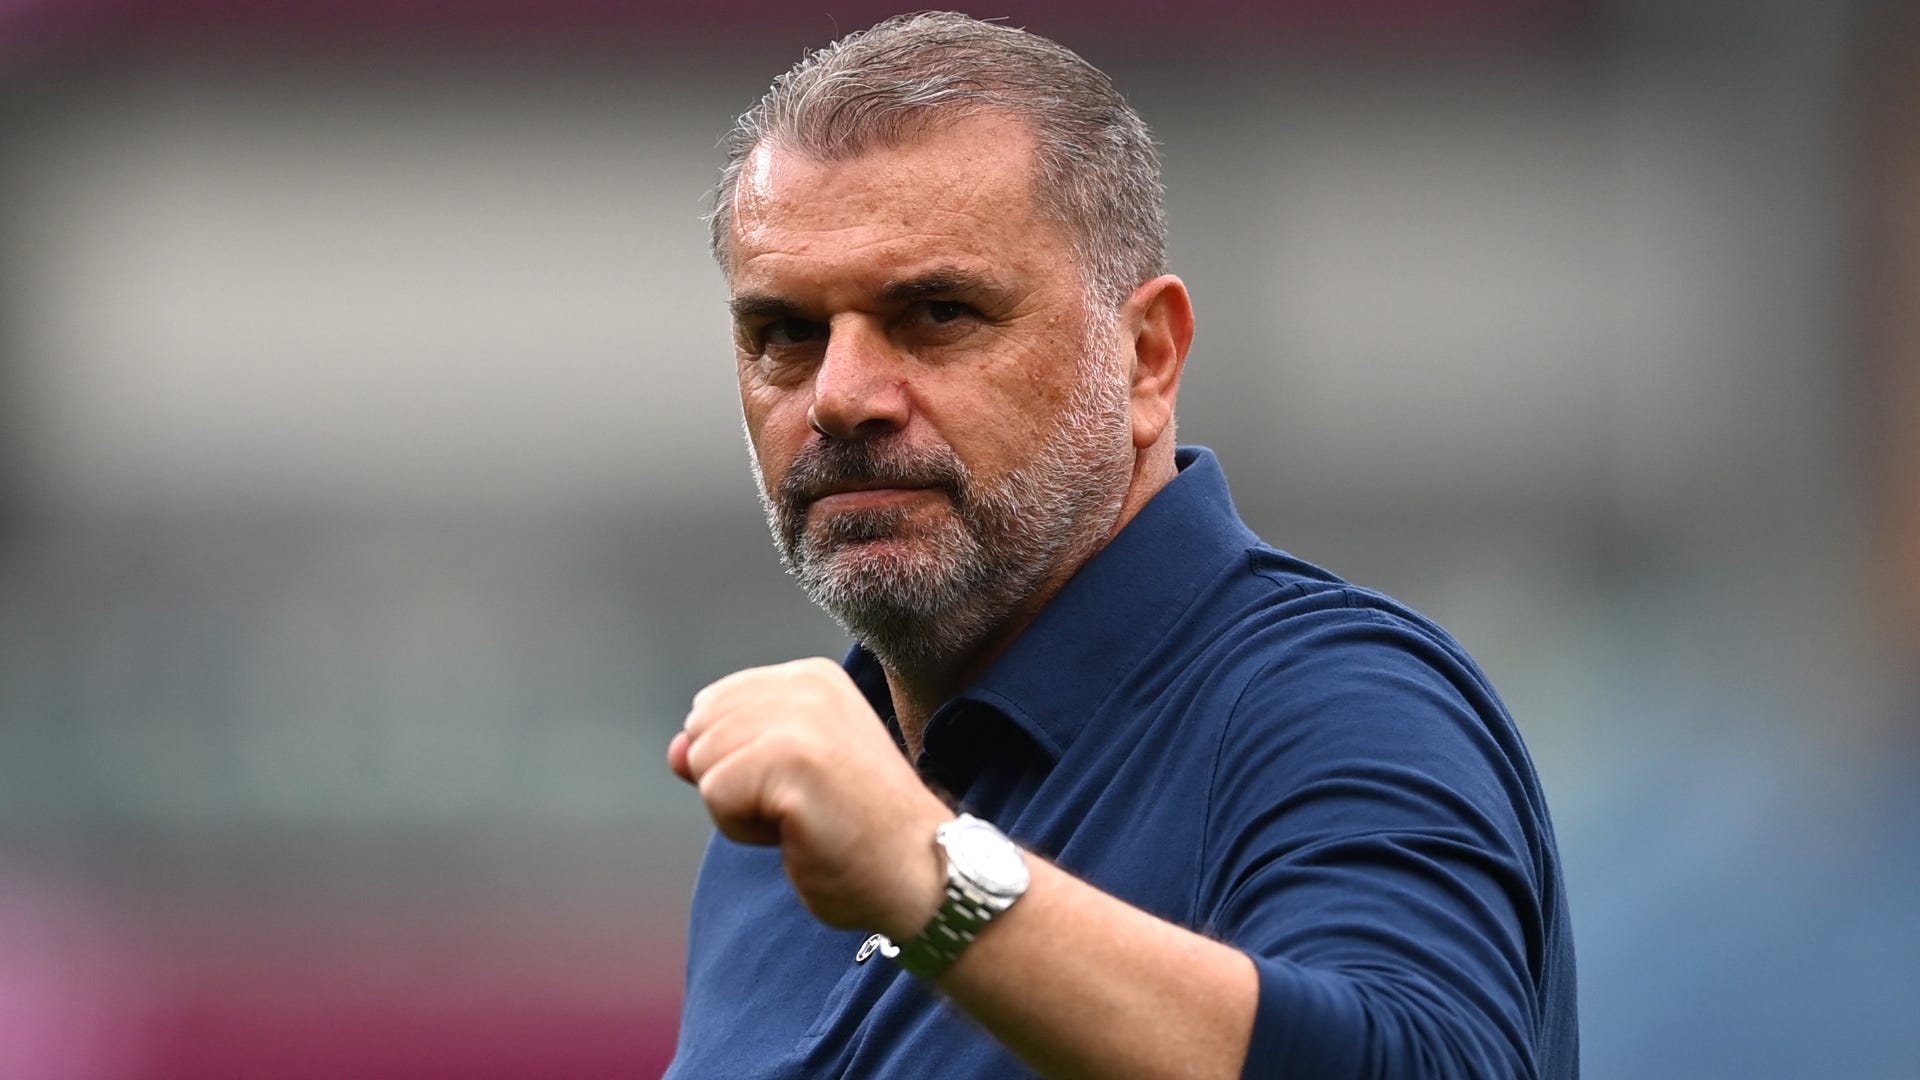 Oh, come on mate!' - Tottenham boss Ange Postecoglou's hilarious response  when asked if he could become England manager in future | Goal.com